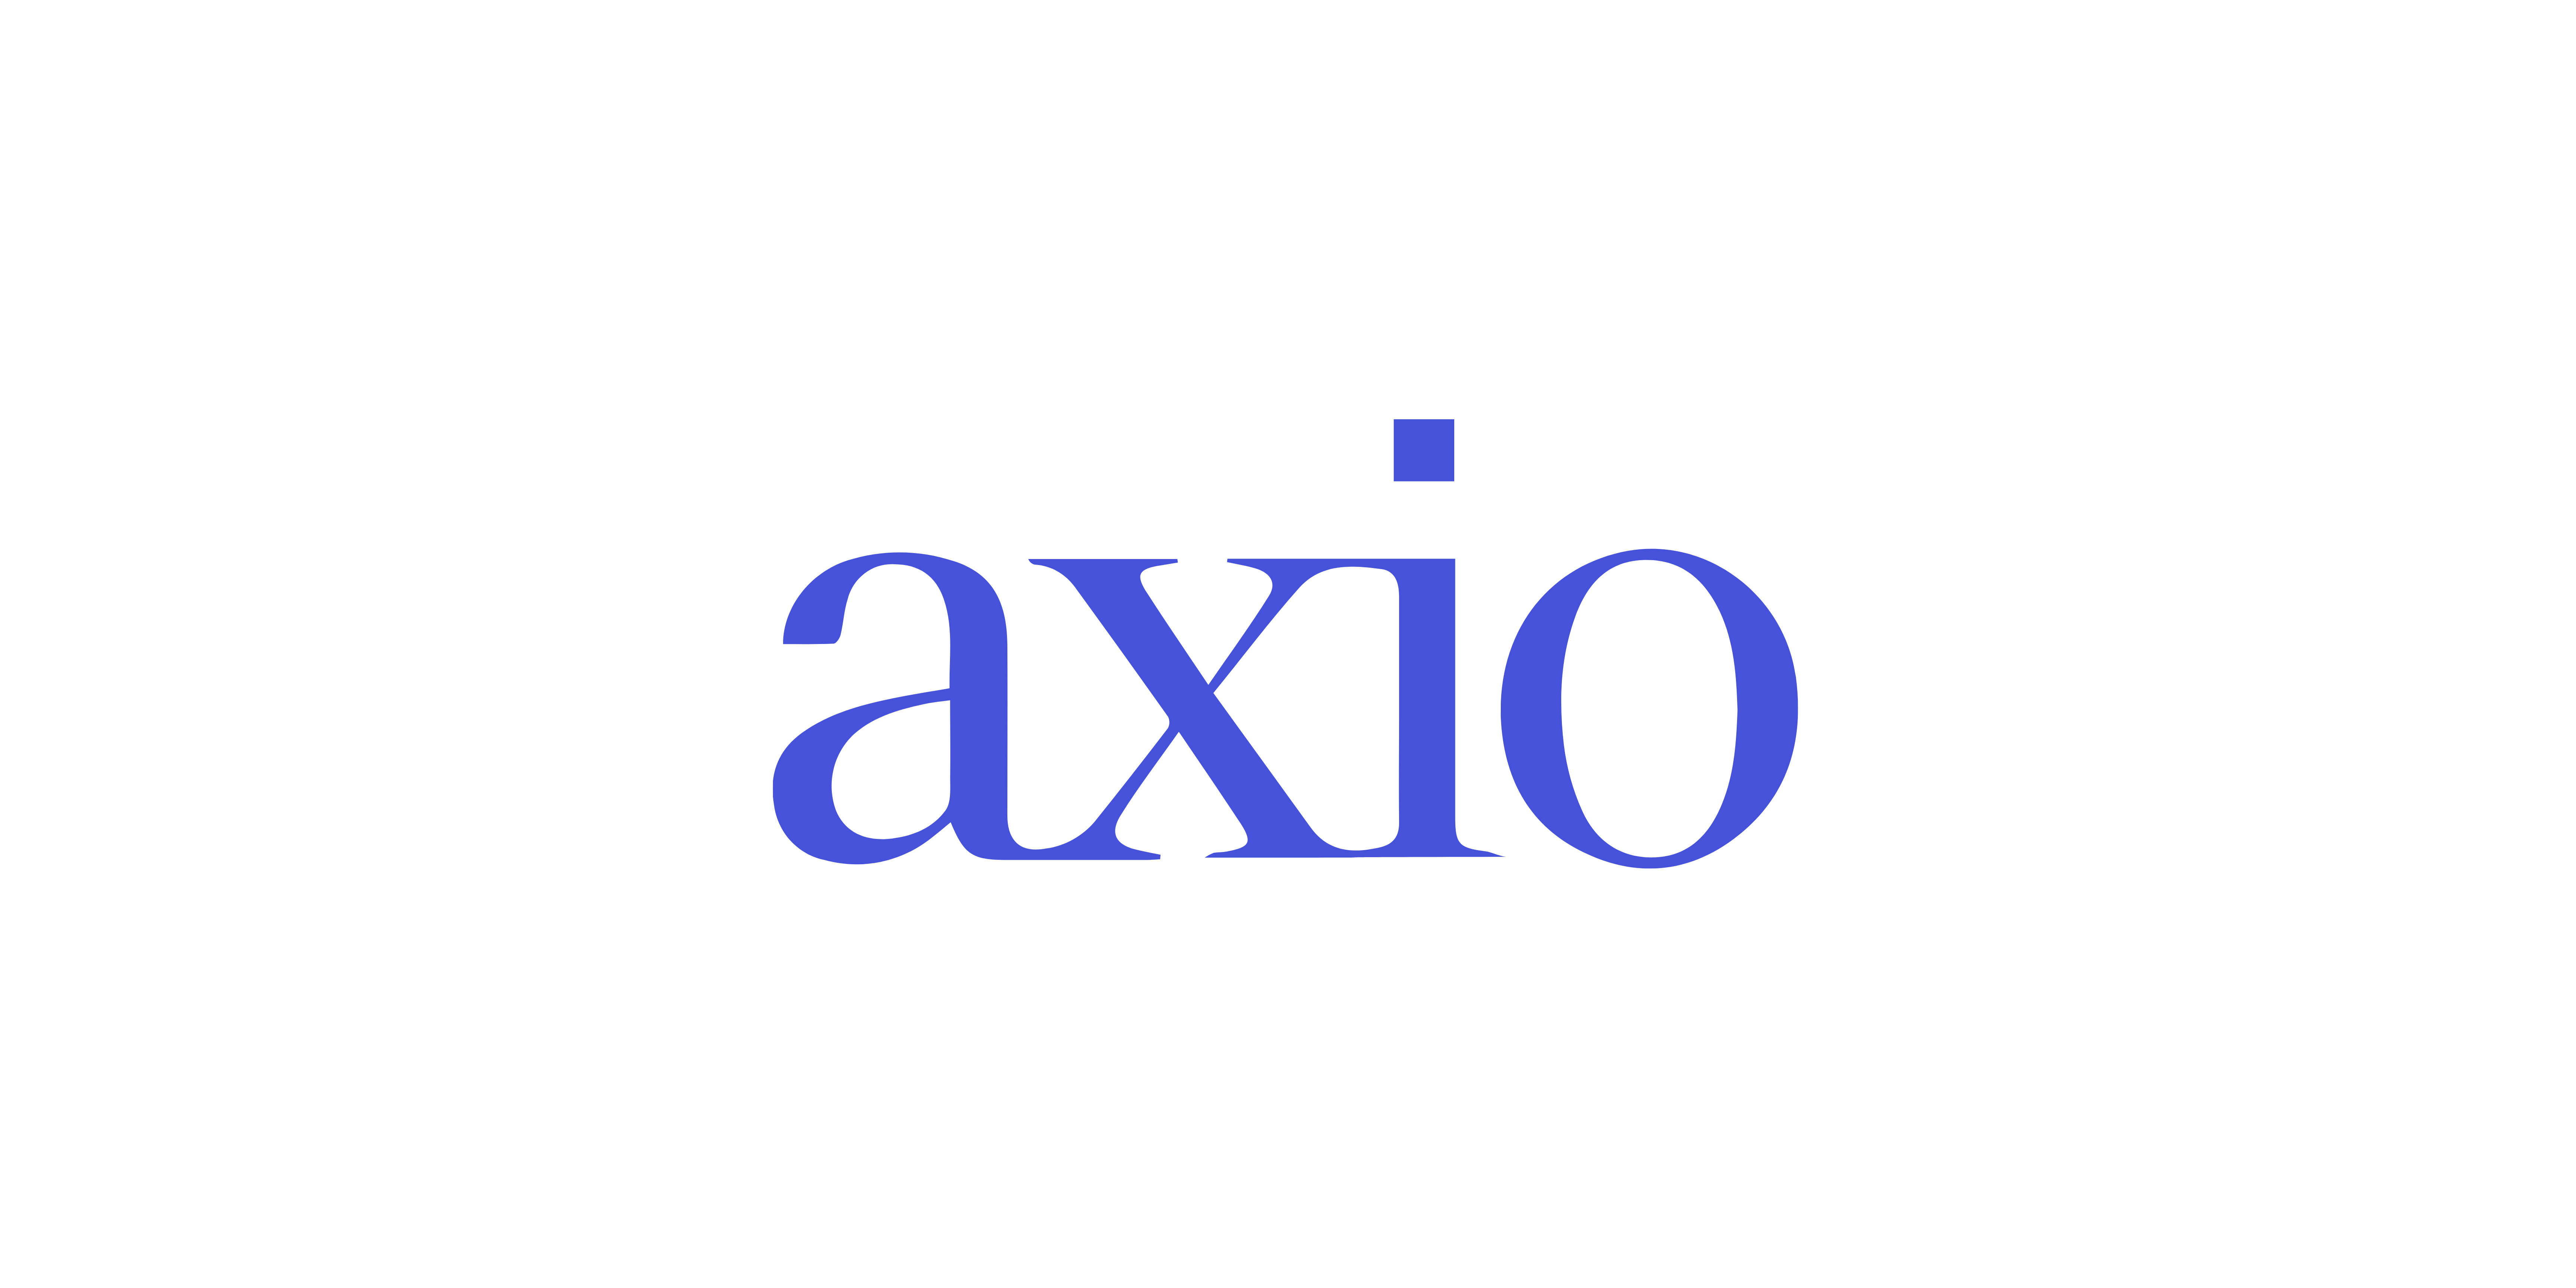 ImpactBT can now show with certainty how new initiatives for IT security will reduce or eliminate risks and demonstrate a clear ROI in new partnership with Axio